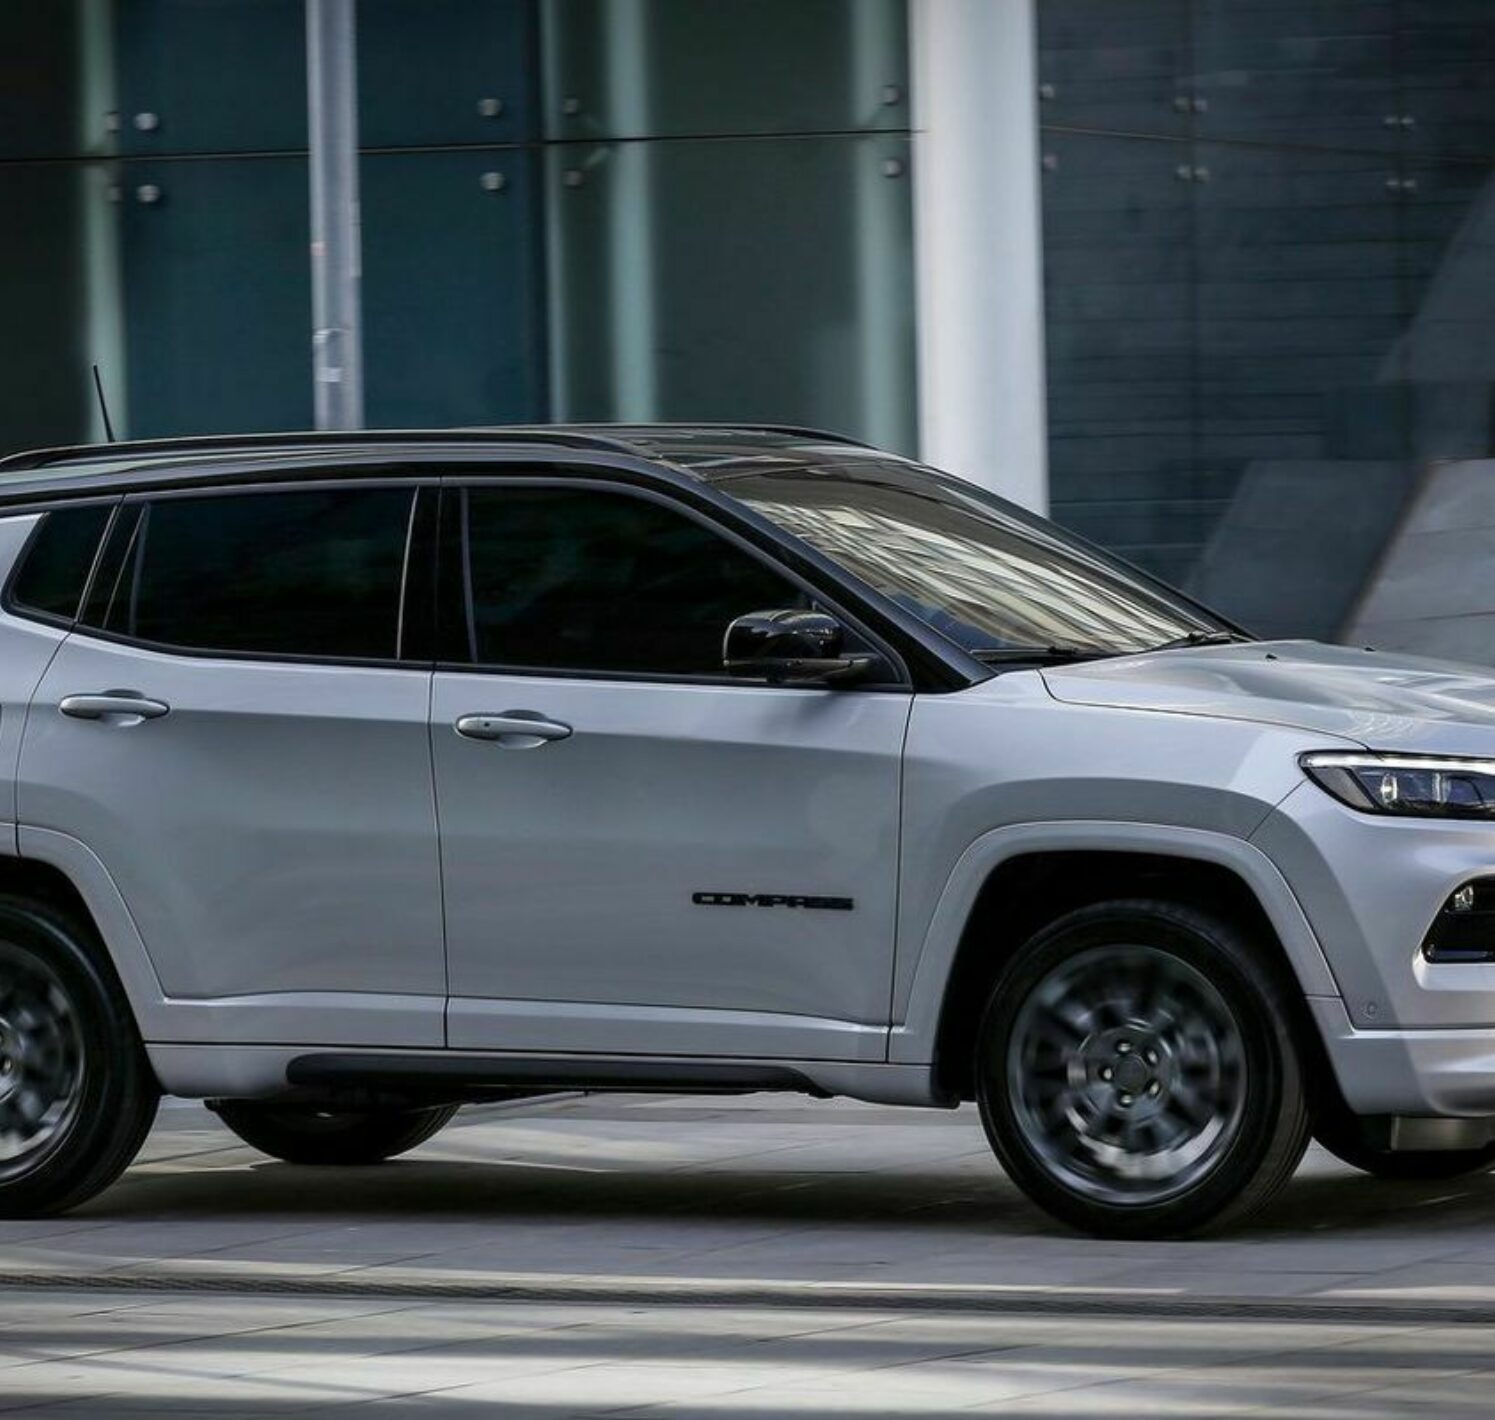 https://autofilter.sk/assets/images/compass/gallery/jeep-compass-2021_24-galeria.jpg - obrazok